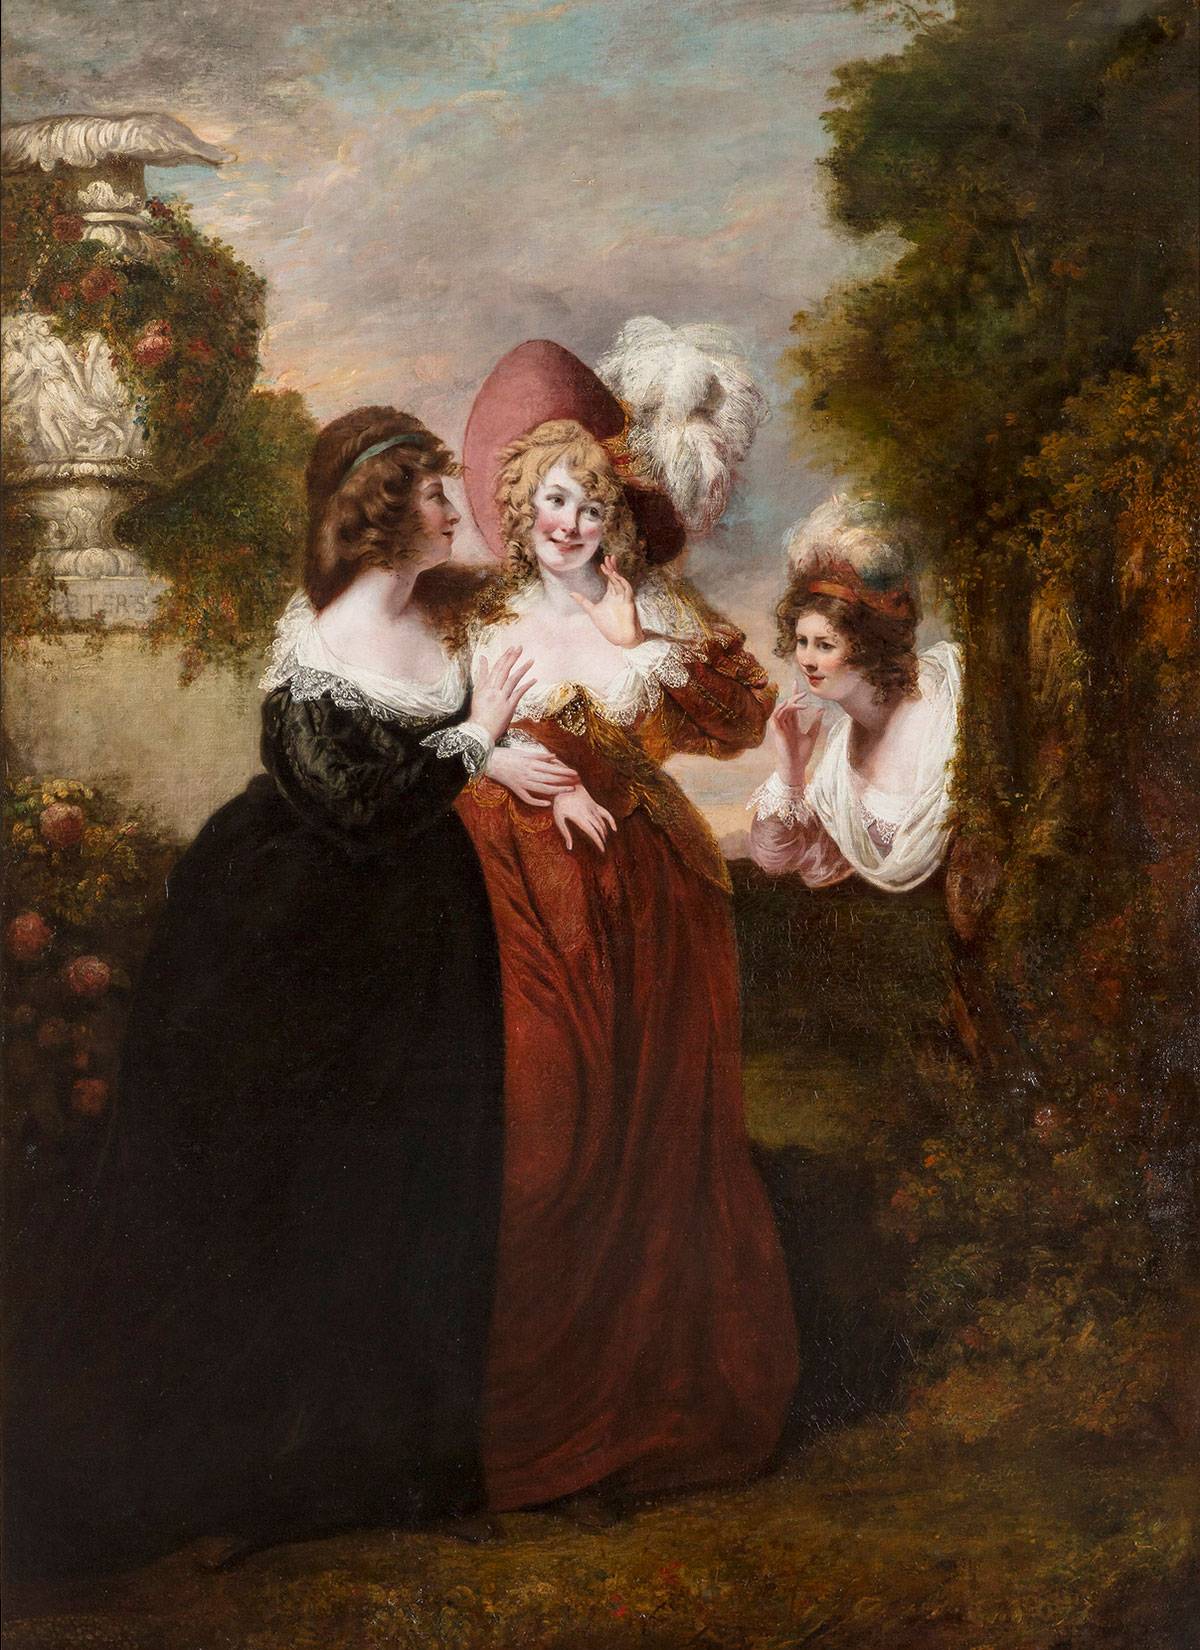 Three women in long, richly colored gowns stand in a garden; two women lean close together and smile, and the third leans in from the corner of the frame, spying on them